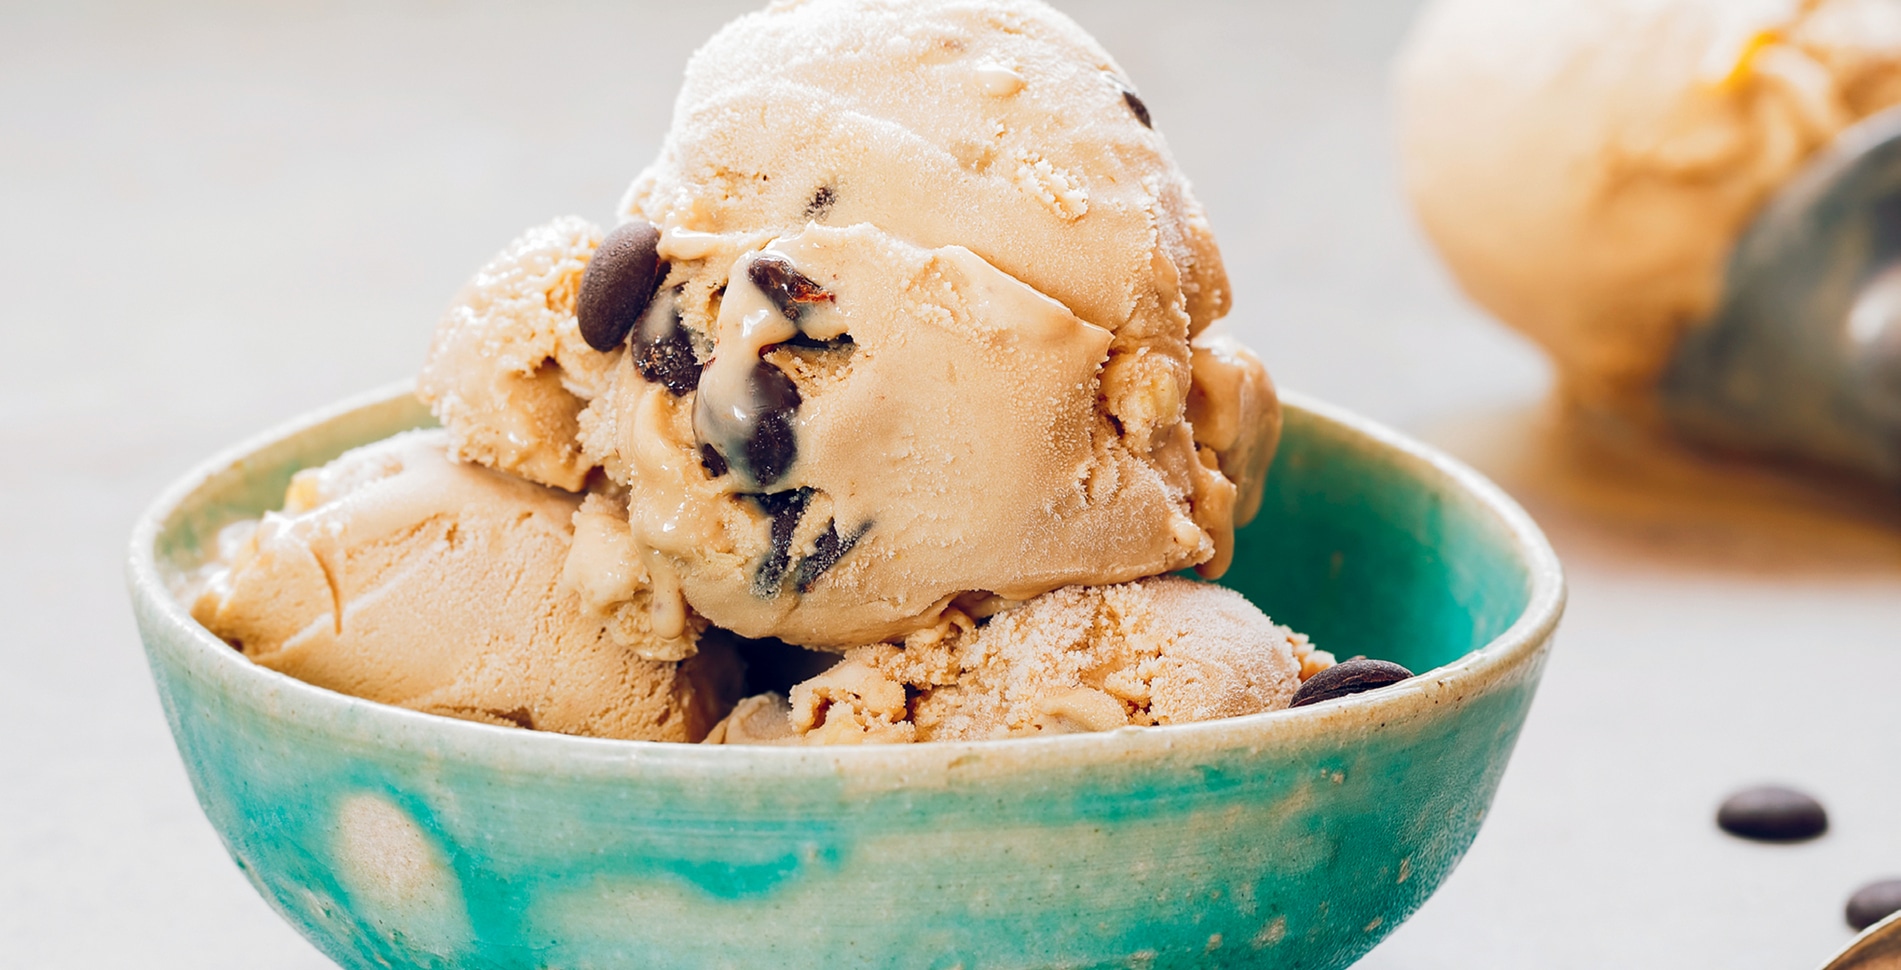 How to Make Your Own Dairy-Free Ice Cream, According to the Experts